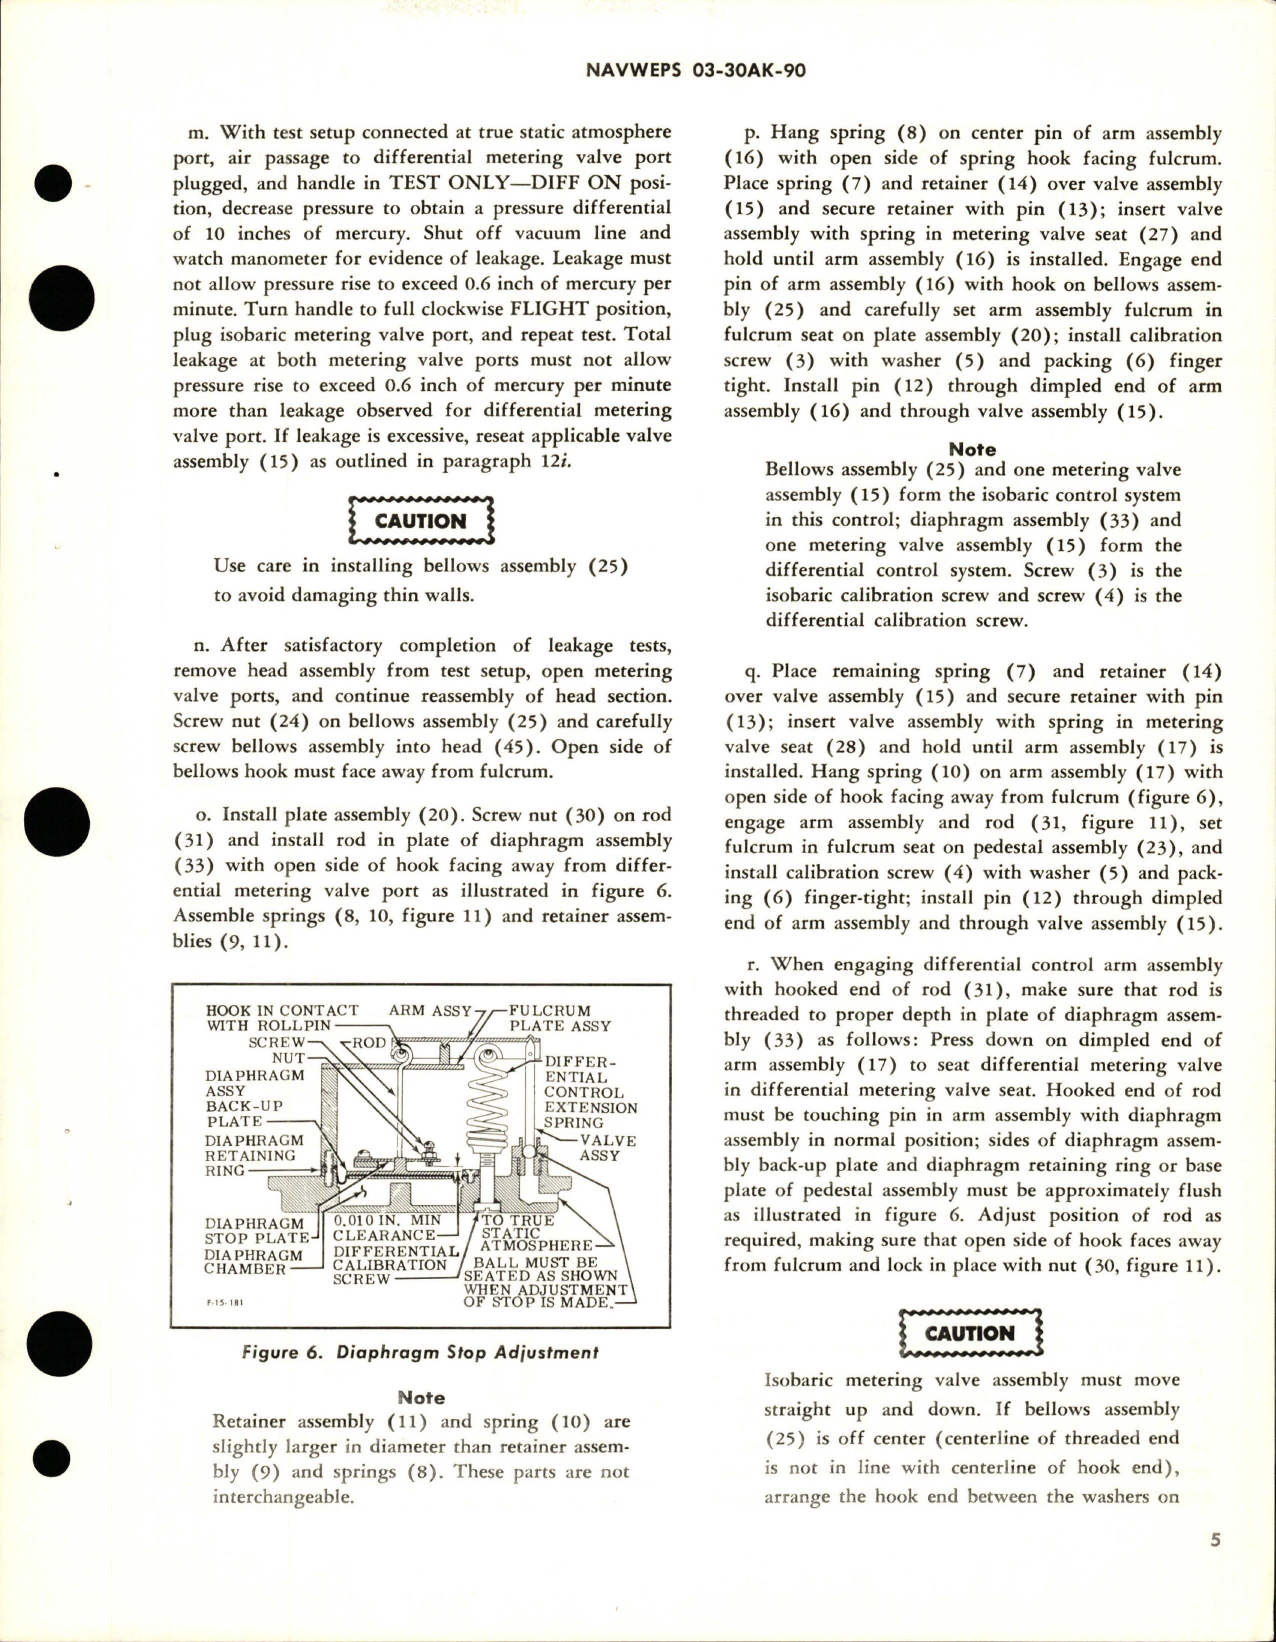 Sample page 7 from AirCorps Library document: Overhaul Instructions with Parts Breakdown for Cabin Air Pressure Outflow Valve Control - Part 102020-11